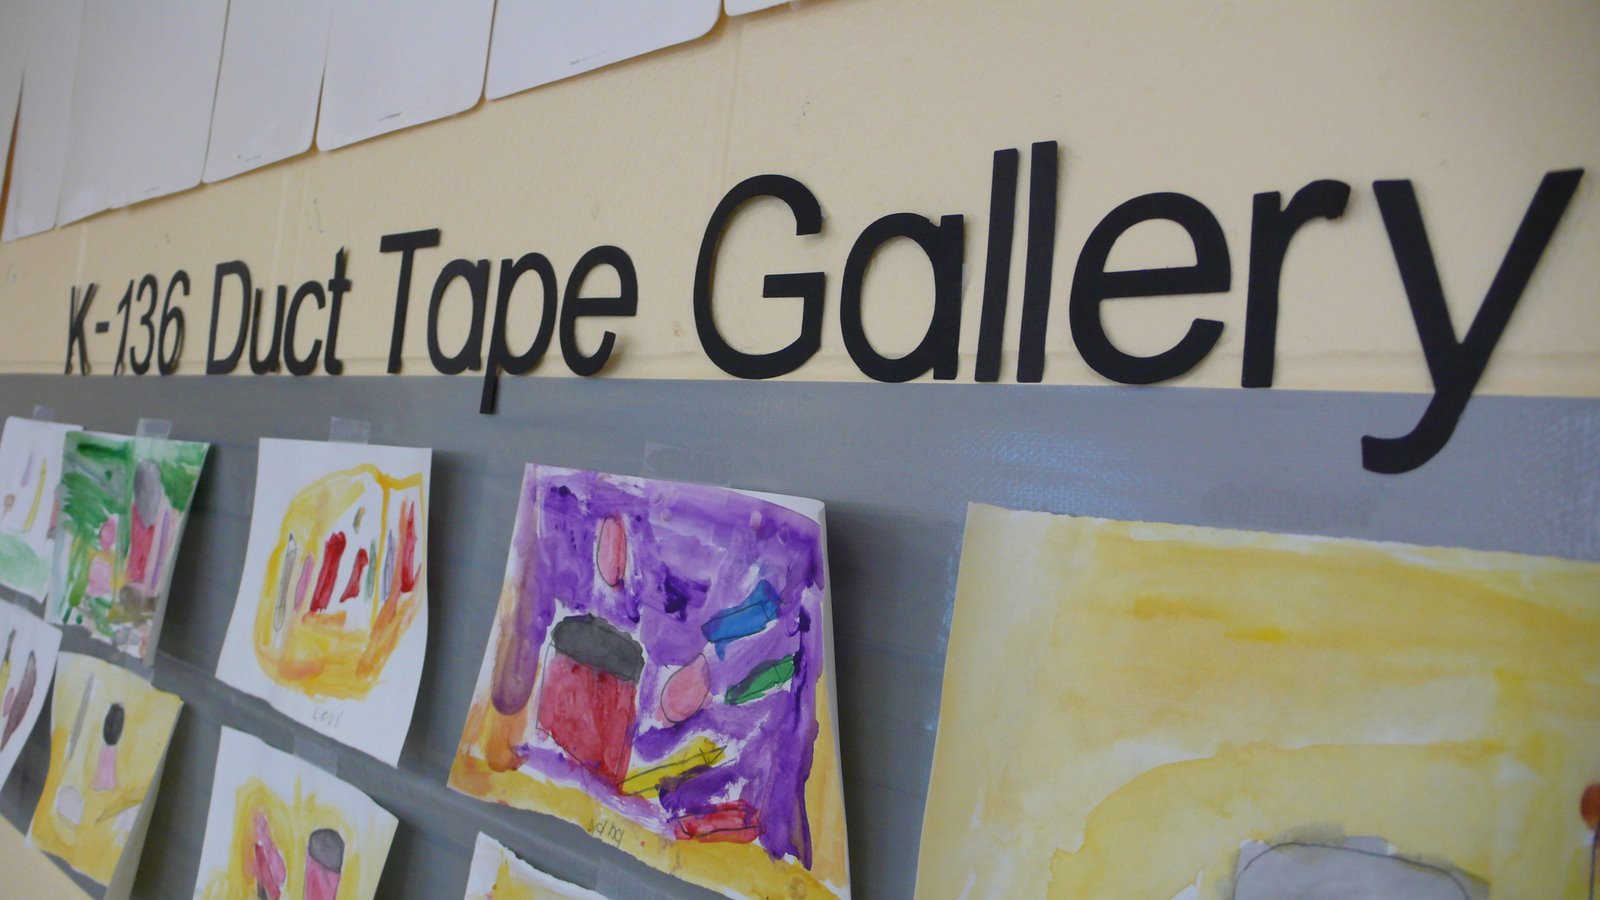 Duct Tape Gallery